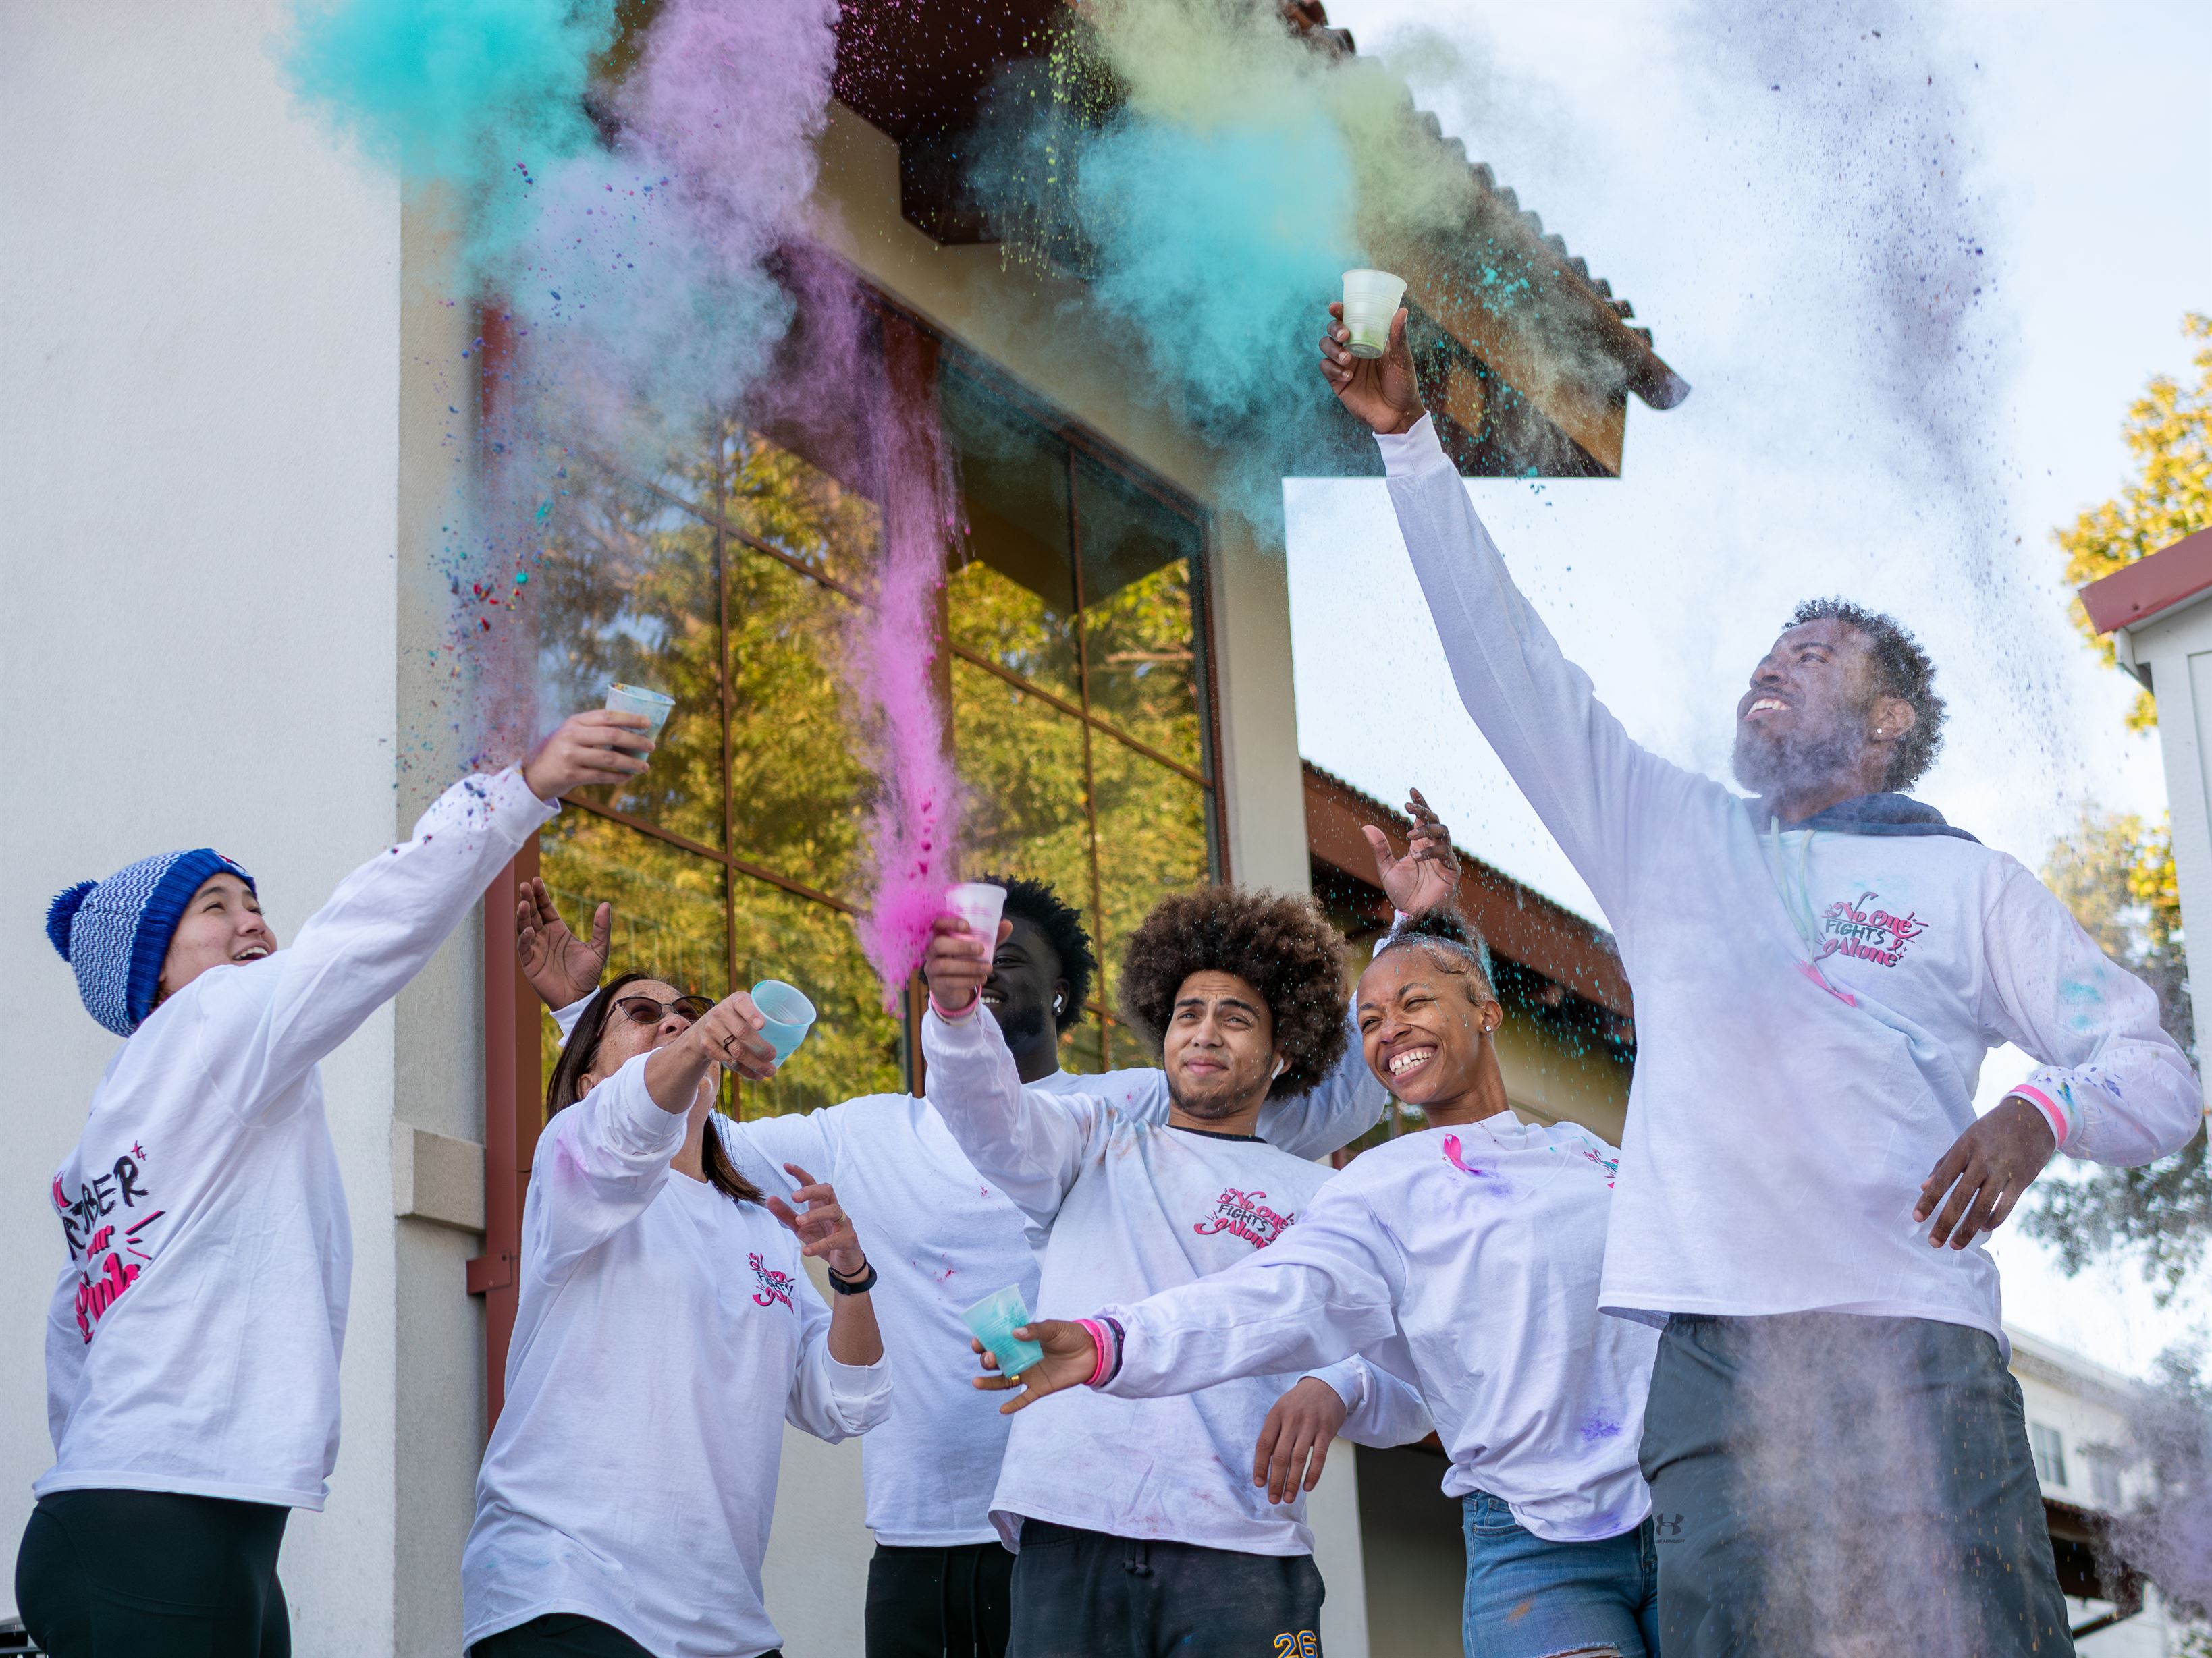 Campus Recreation Center staff throwing paint in the air at the Cancer Awareness Walk event. Photo courtesy of Maral Tutunjian | The Montclarion